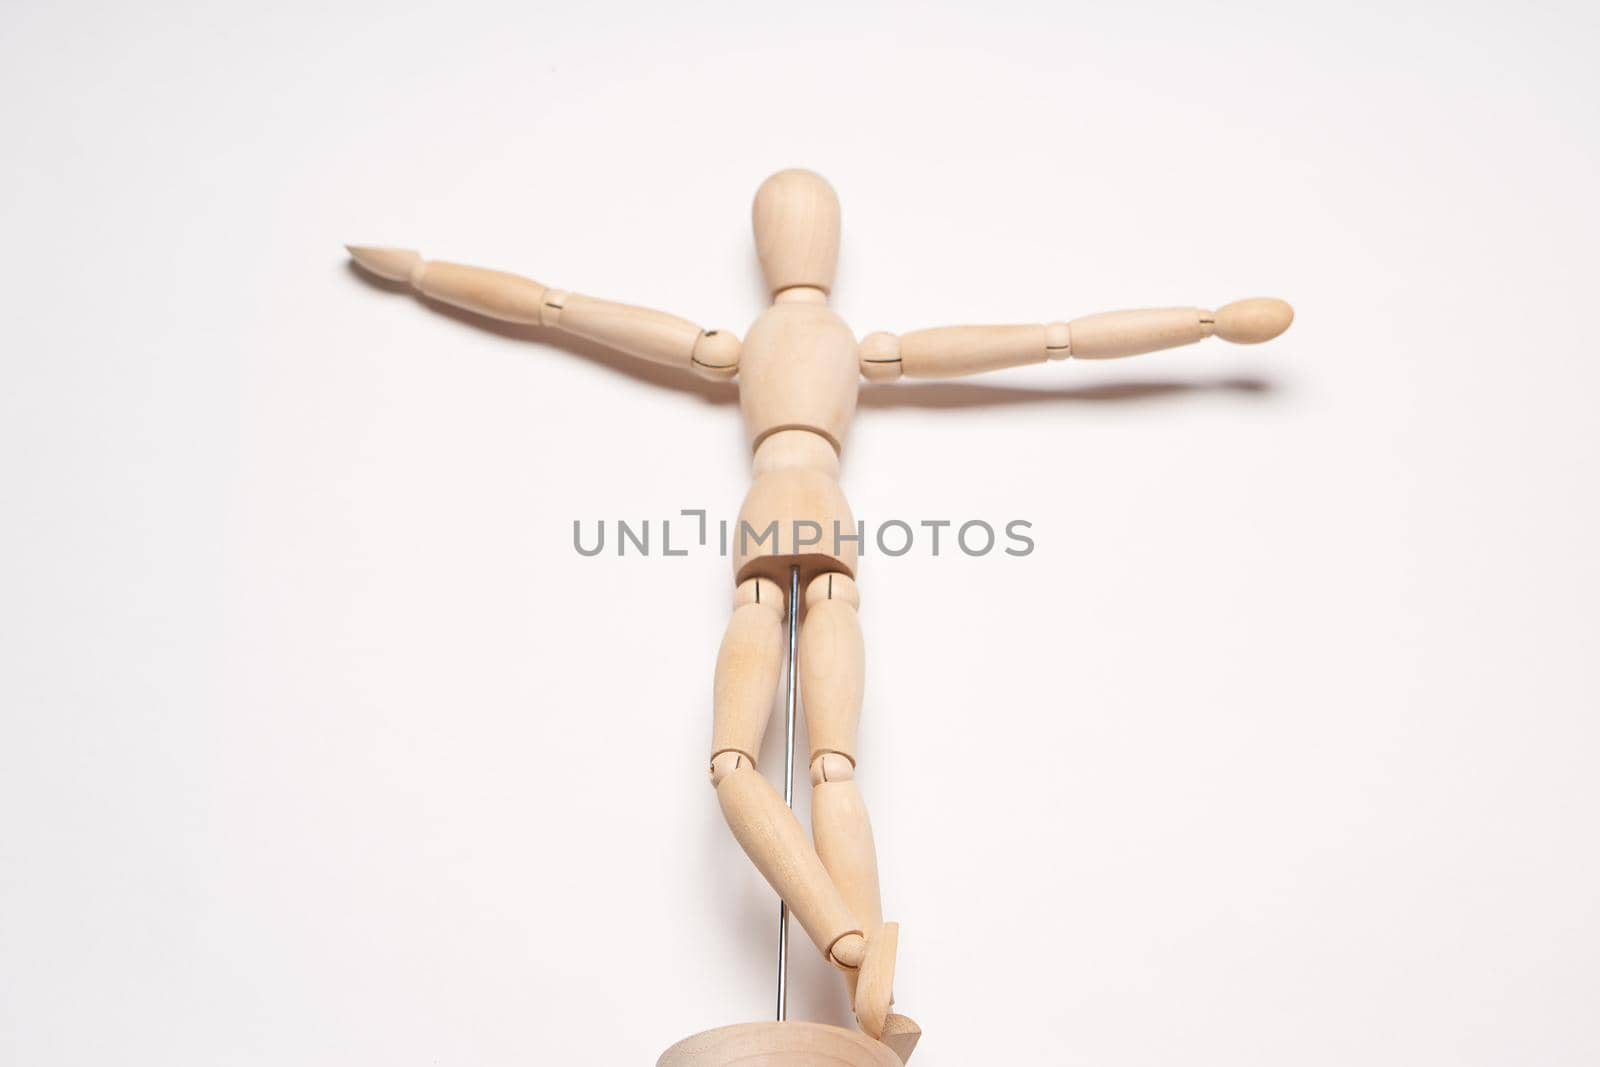 design wooden mannequin object toy posing light background. High quality photo